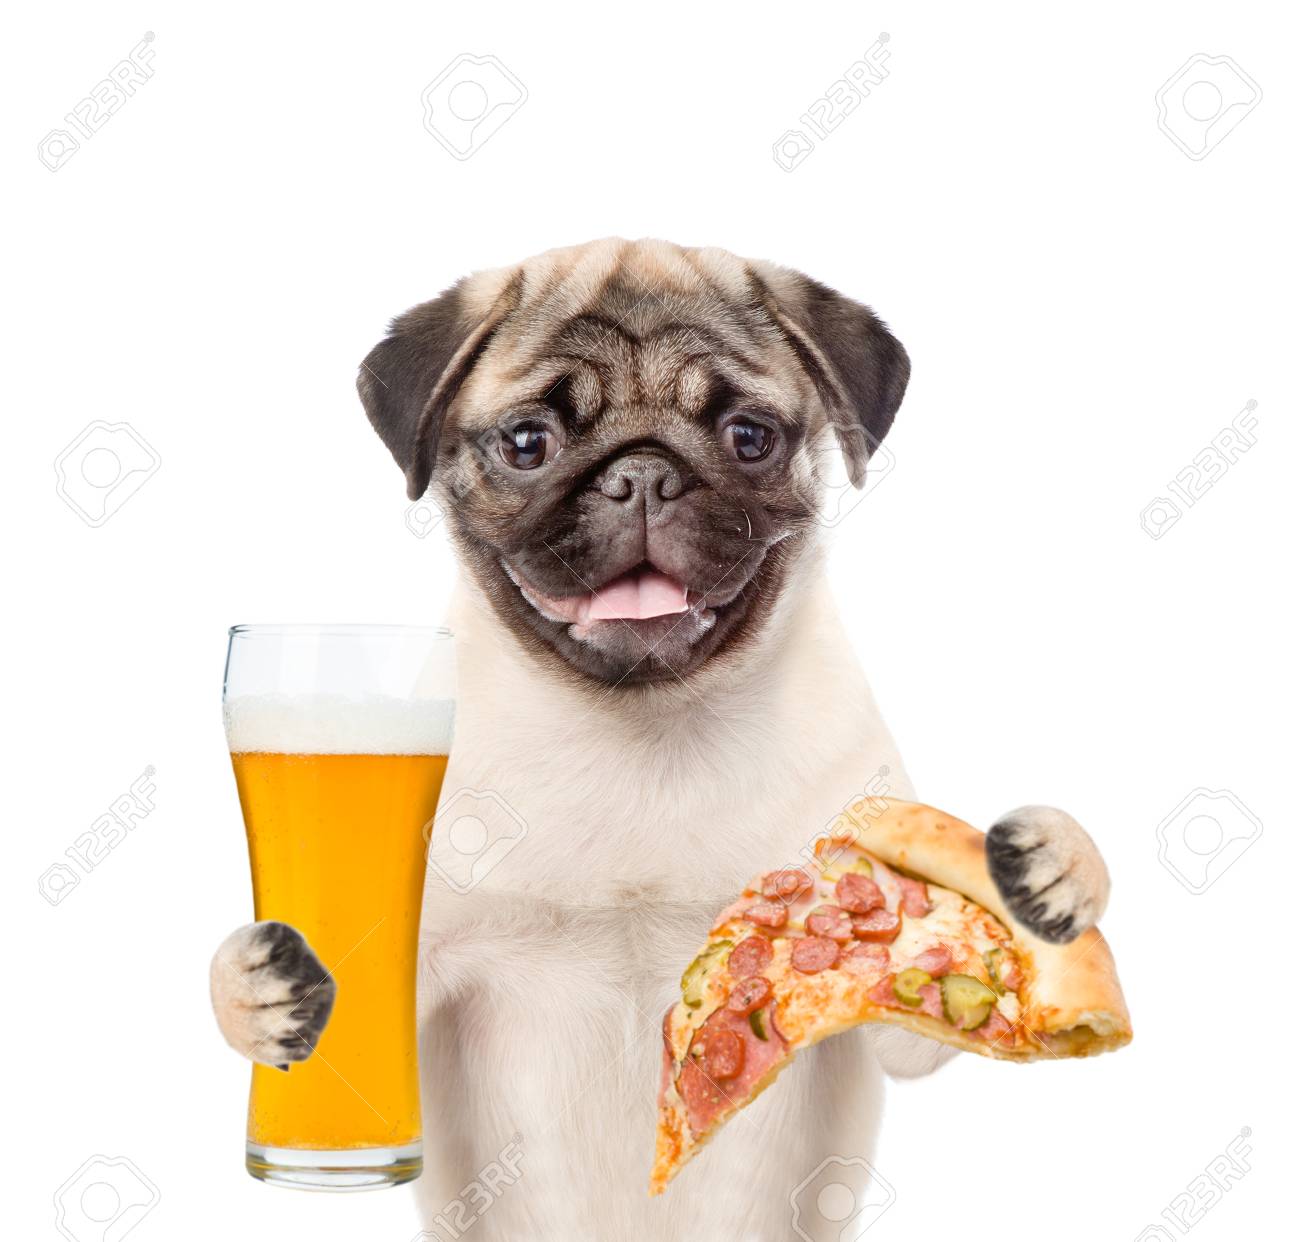 79308217-dog-holding-pizza-and-a-glass-of-beer-isolated-on-white-background-.jpg